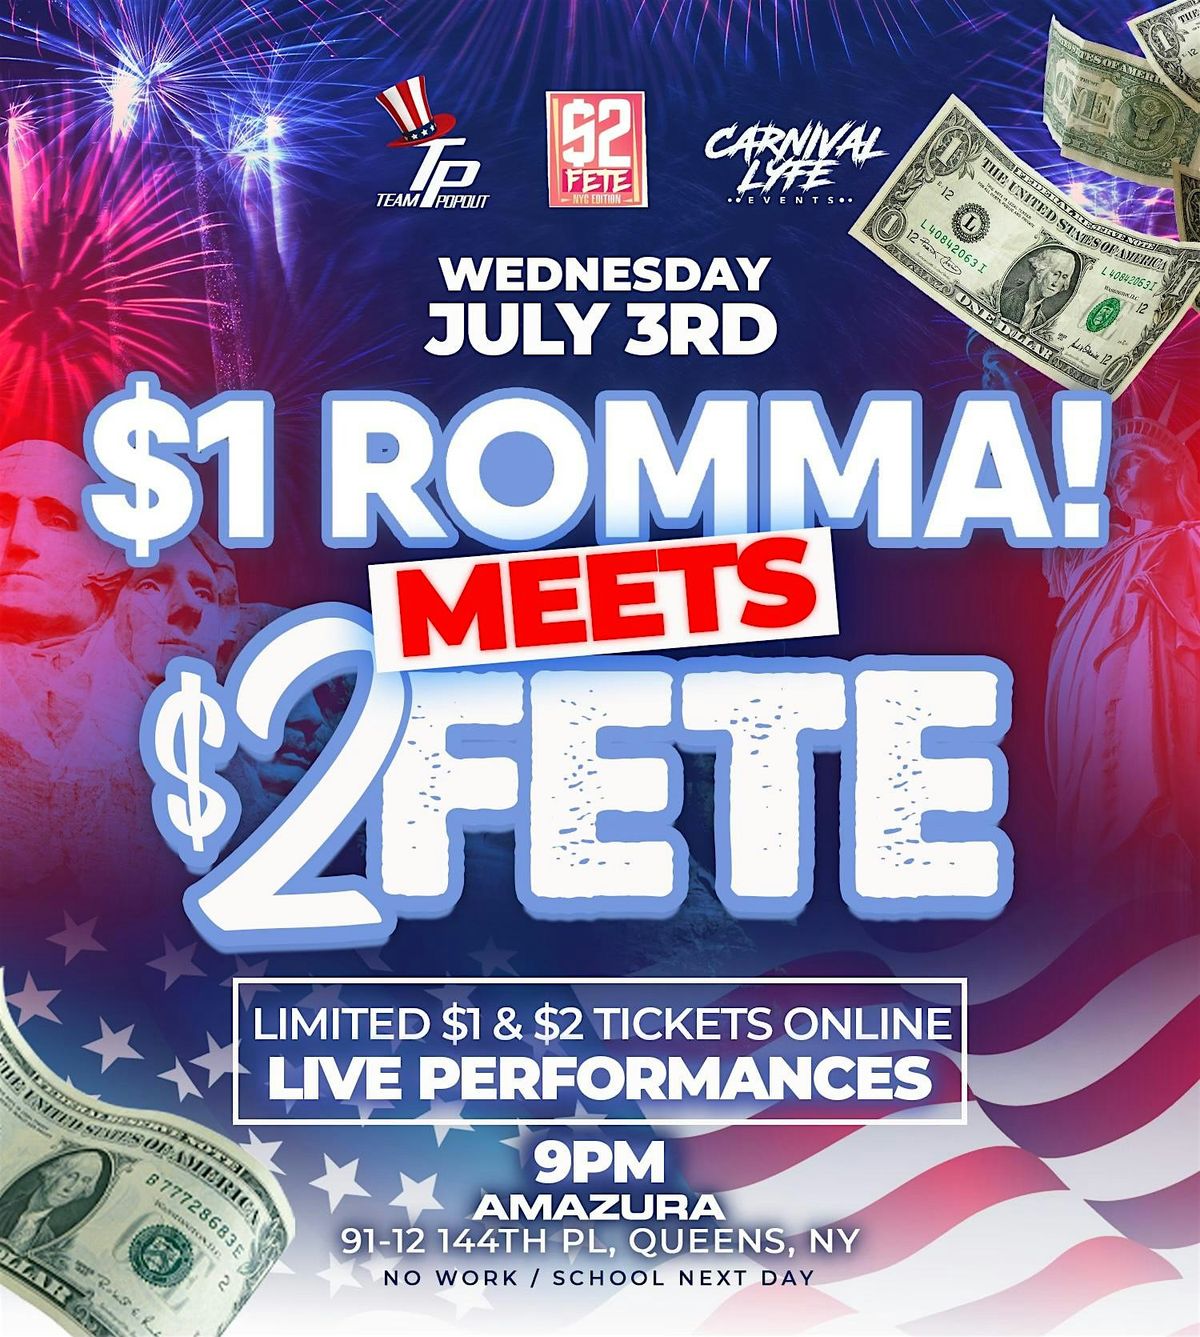 $1 ROMMA INDEPENDENCE